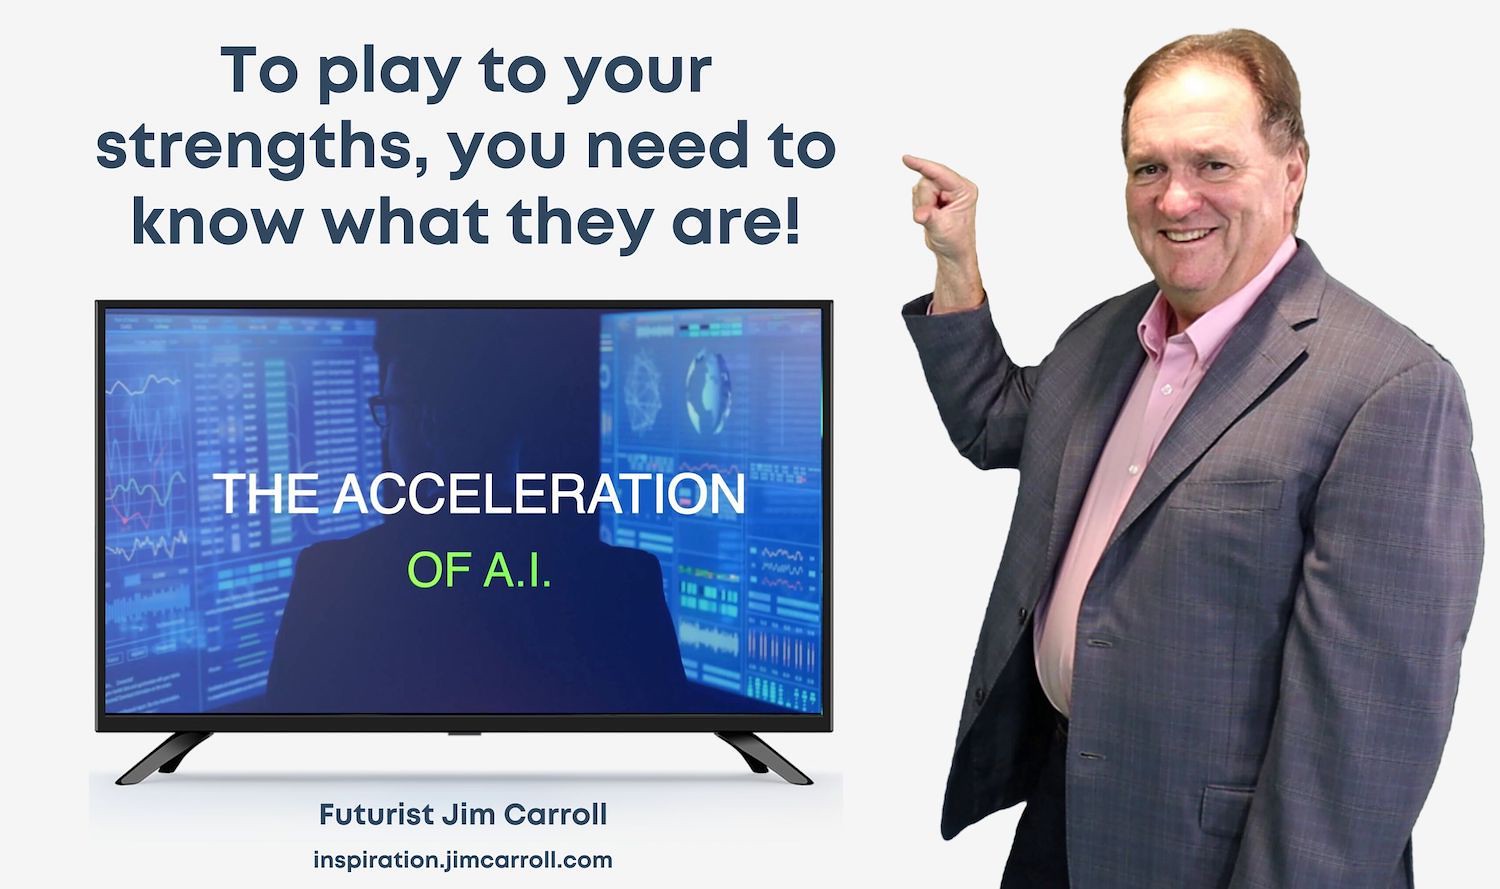 "To play to your strengths, you need to know what they are!" - Futurist Jim Carroll